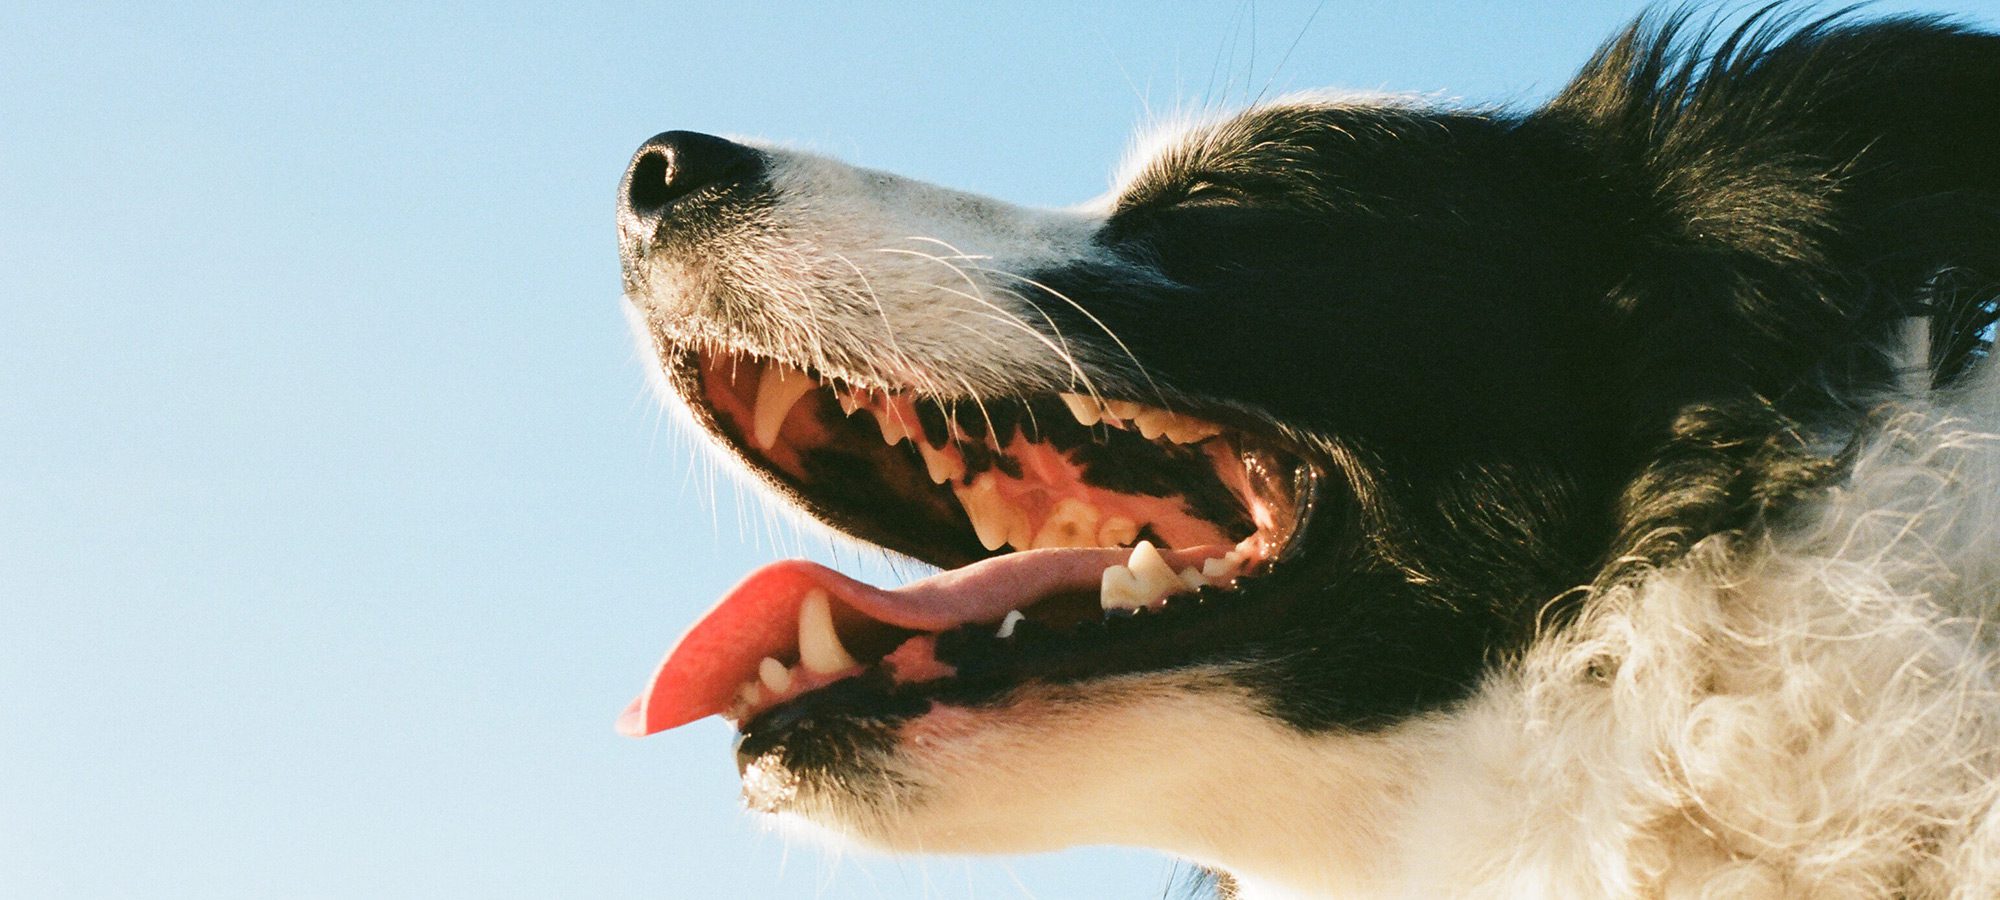 View of a dog's open mouth from below.